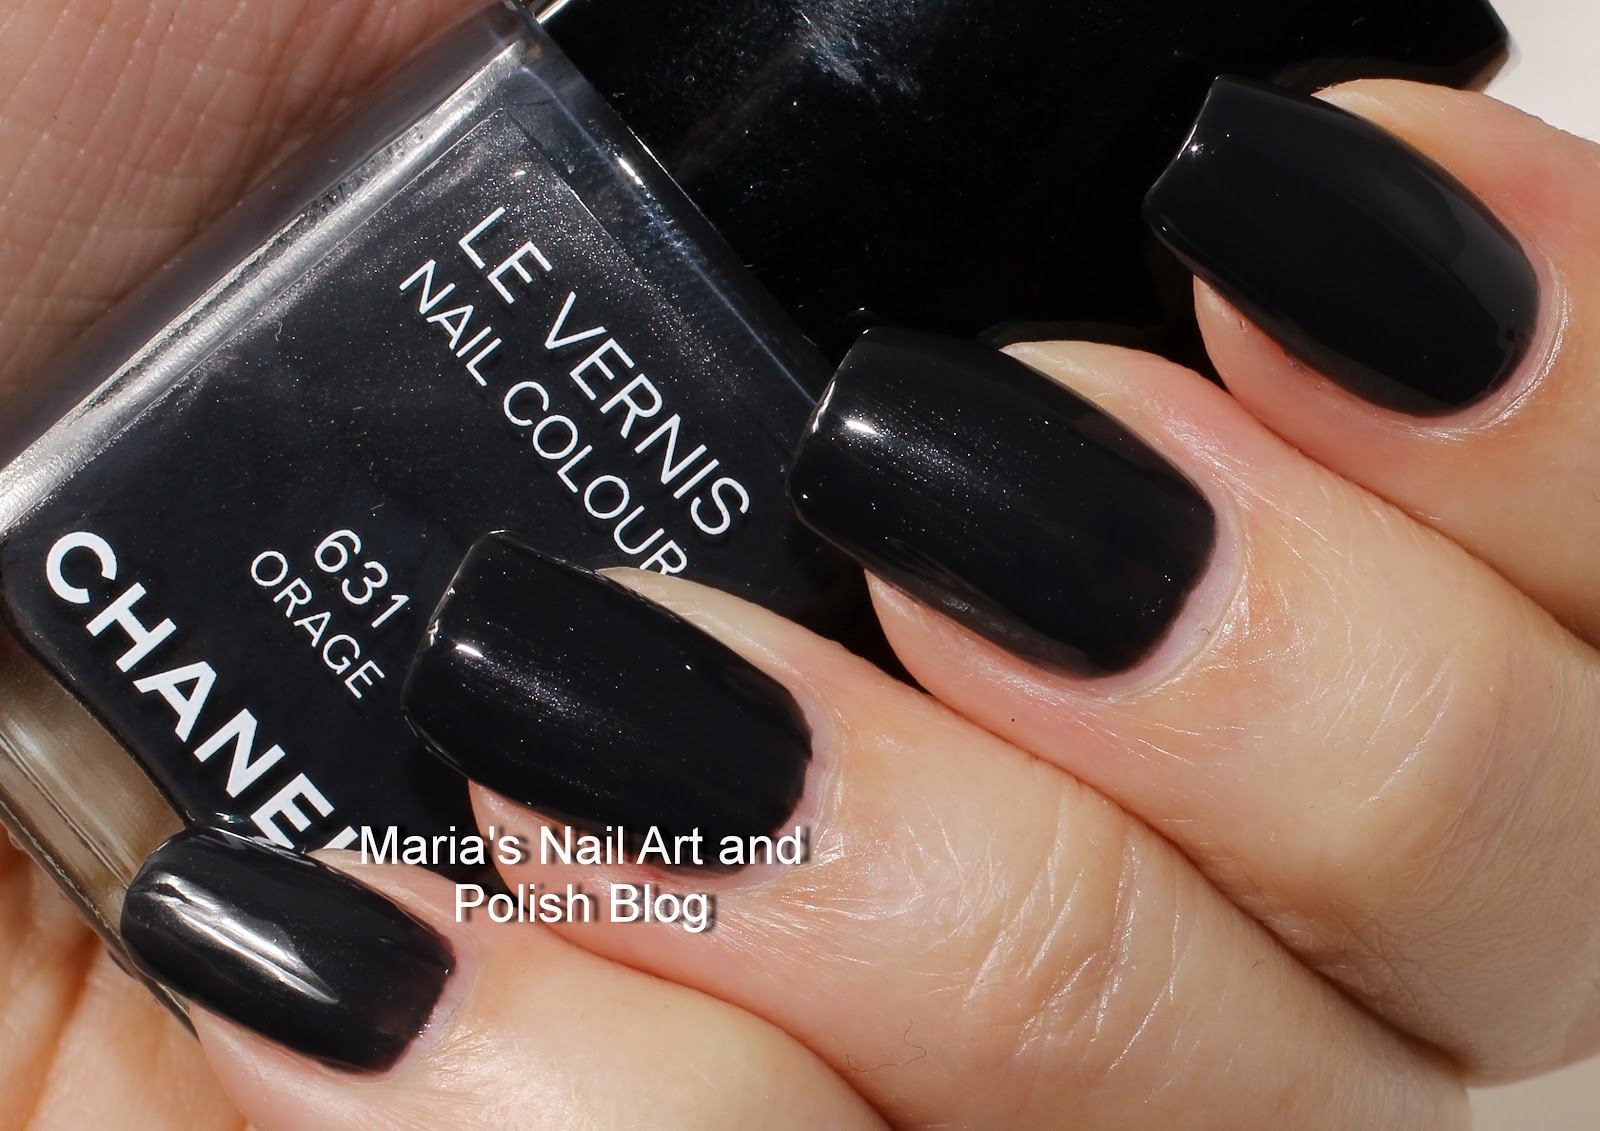 Chanel Le Vernis #625 Secret, #629 Atmosphere and #631 Orage from